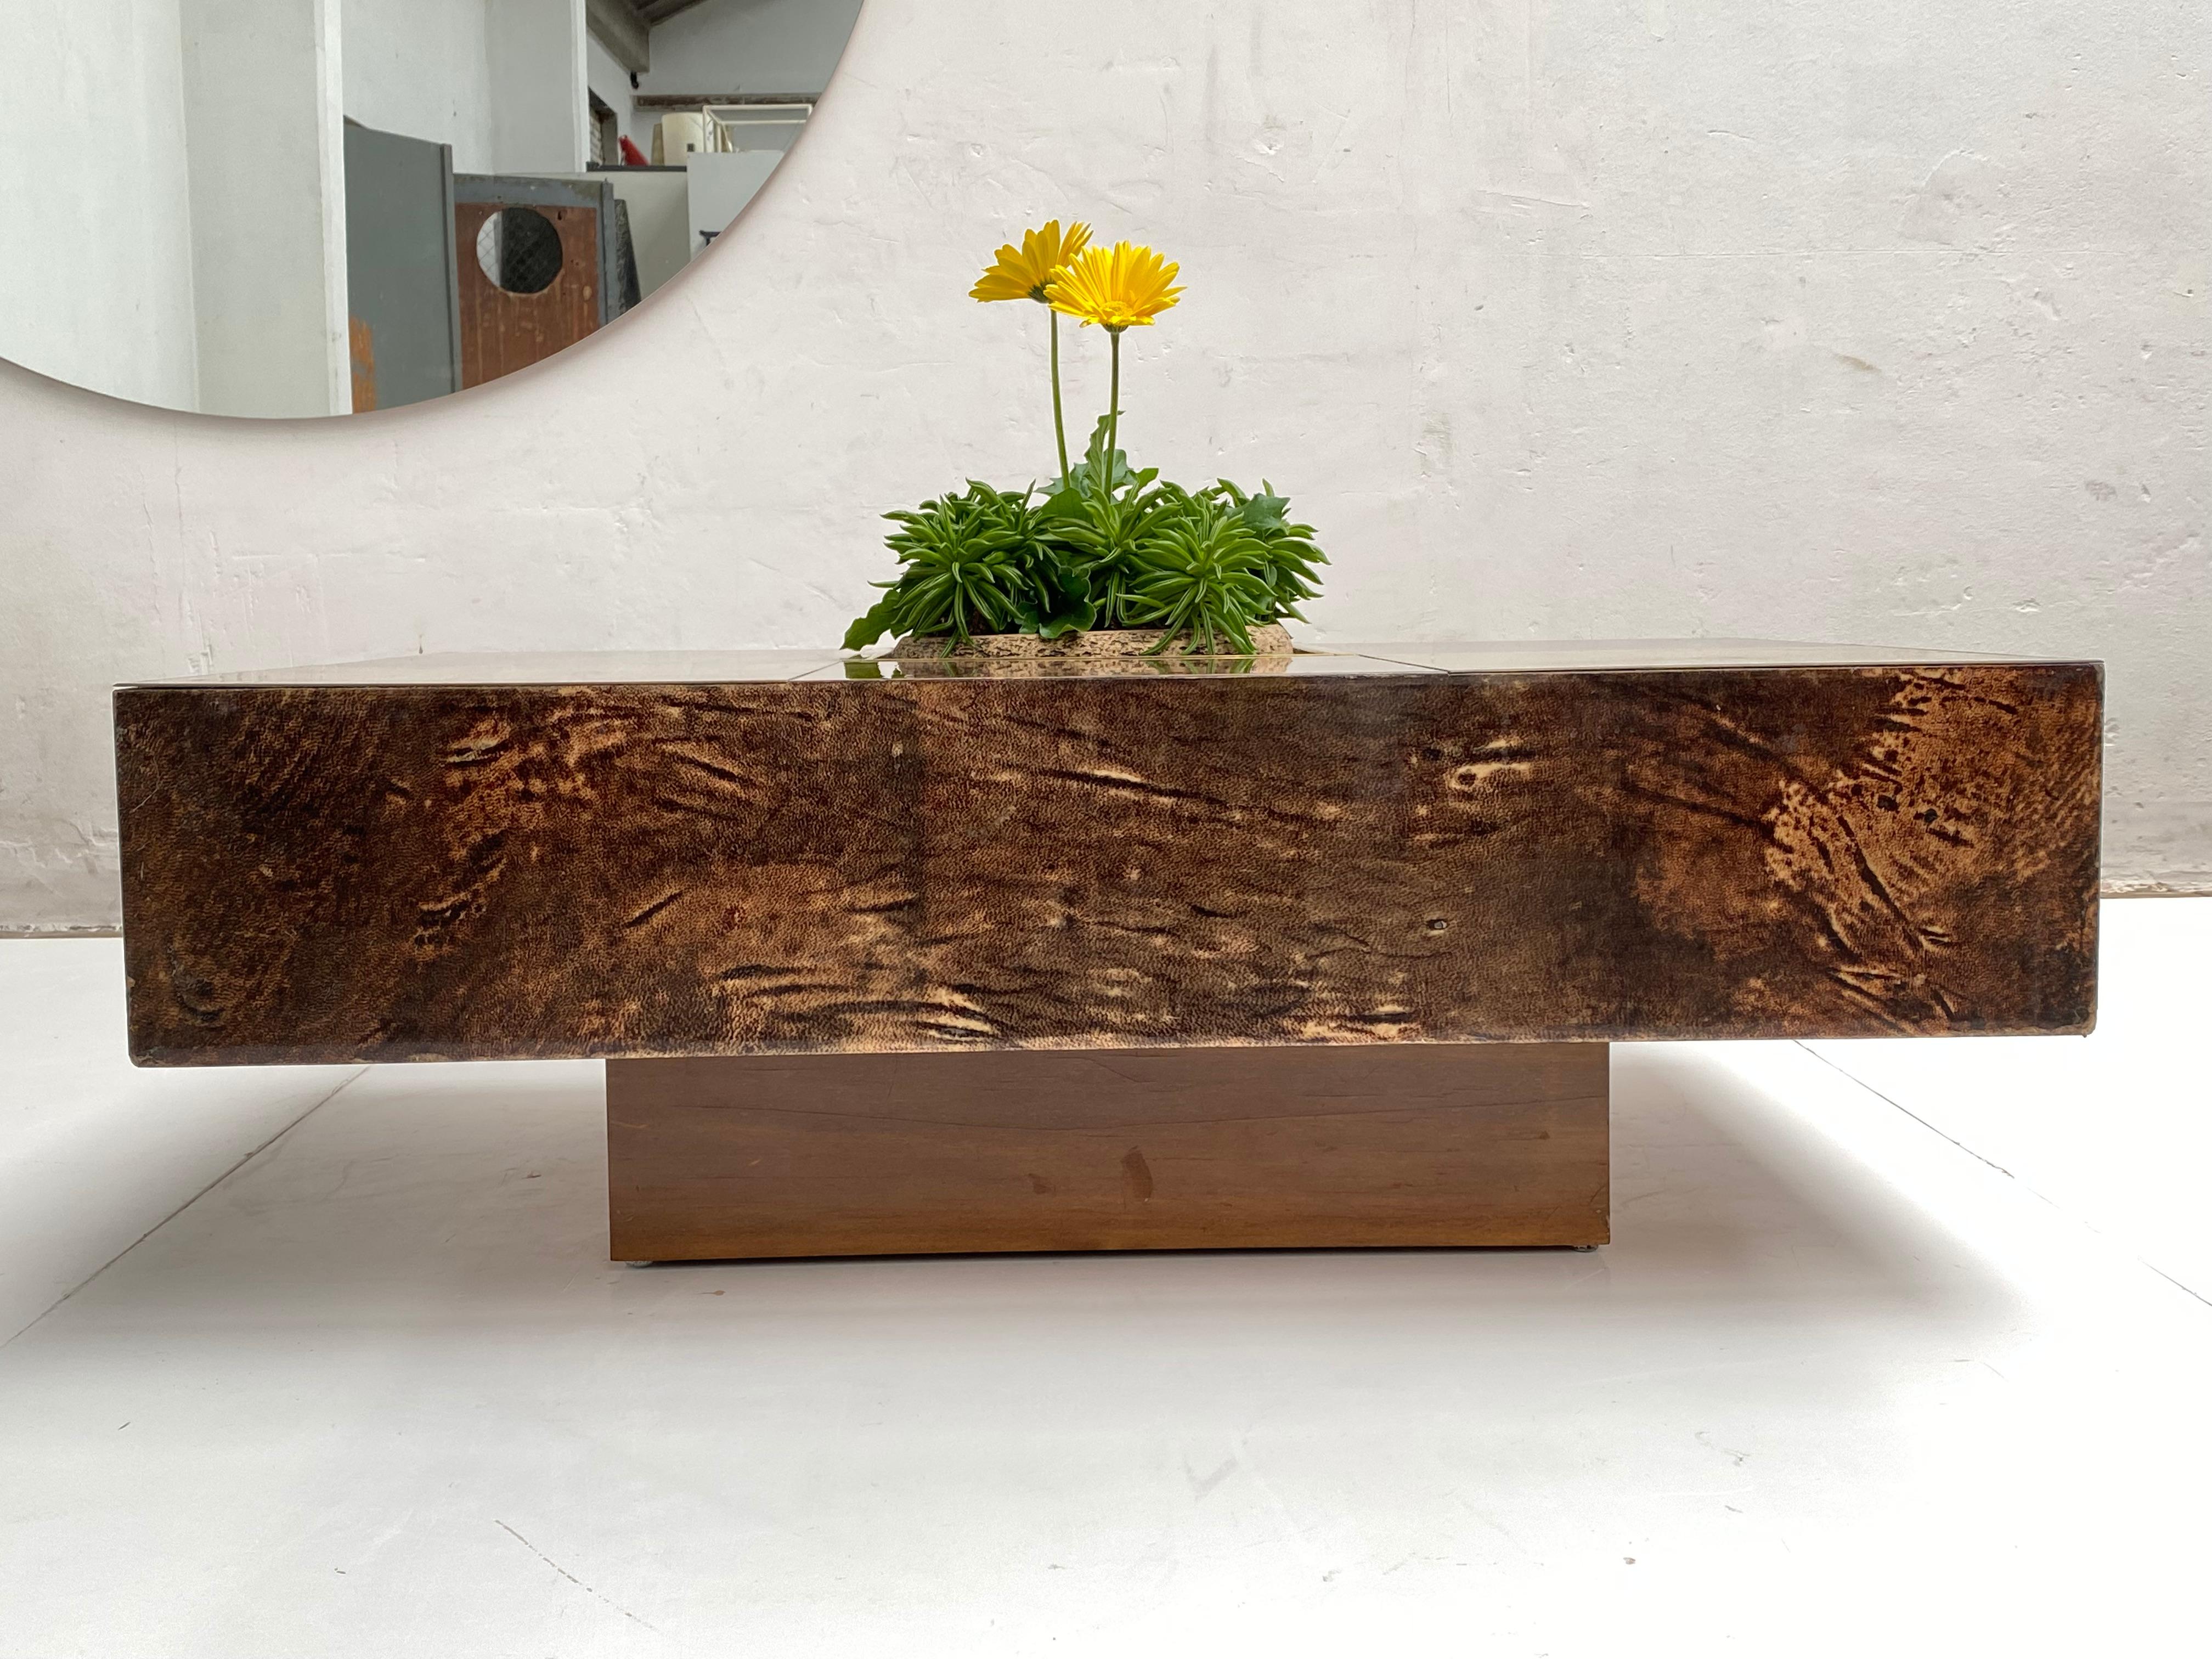 Rare and Unique Aldo Tura Goatskin Coffee Table with Brass Planter Italy 1960's For Sale 8